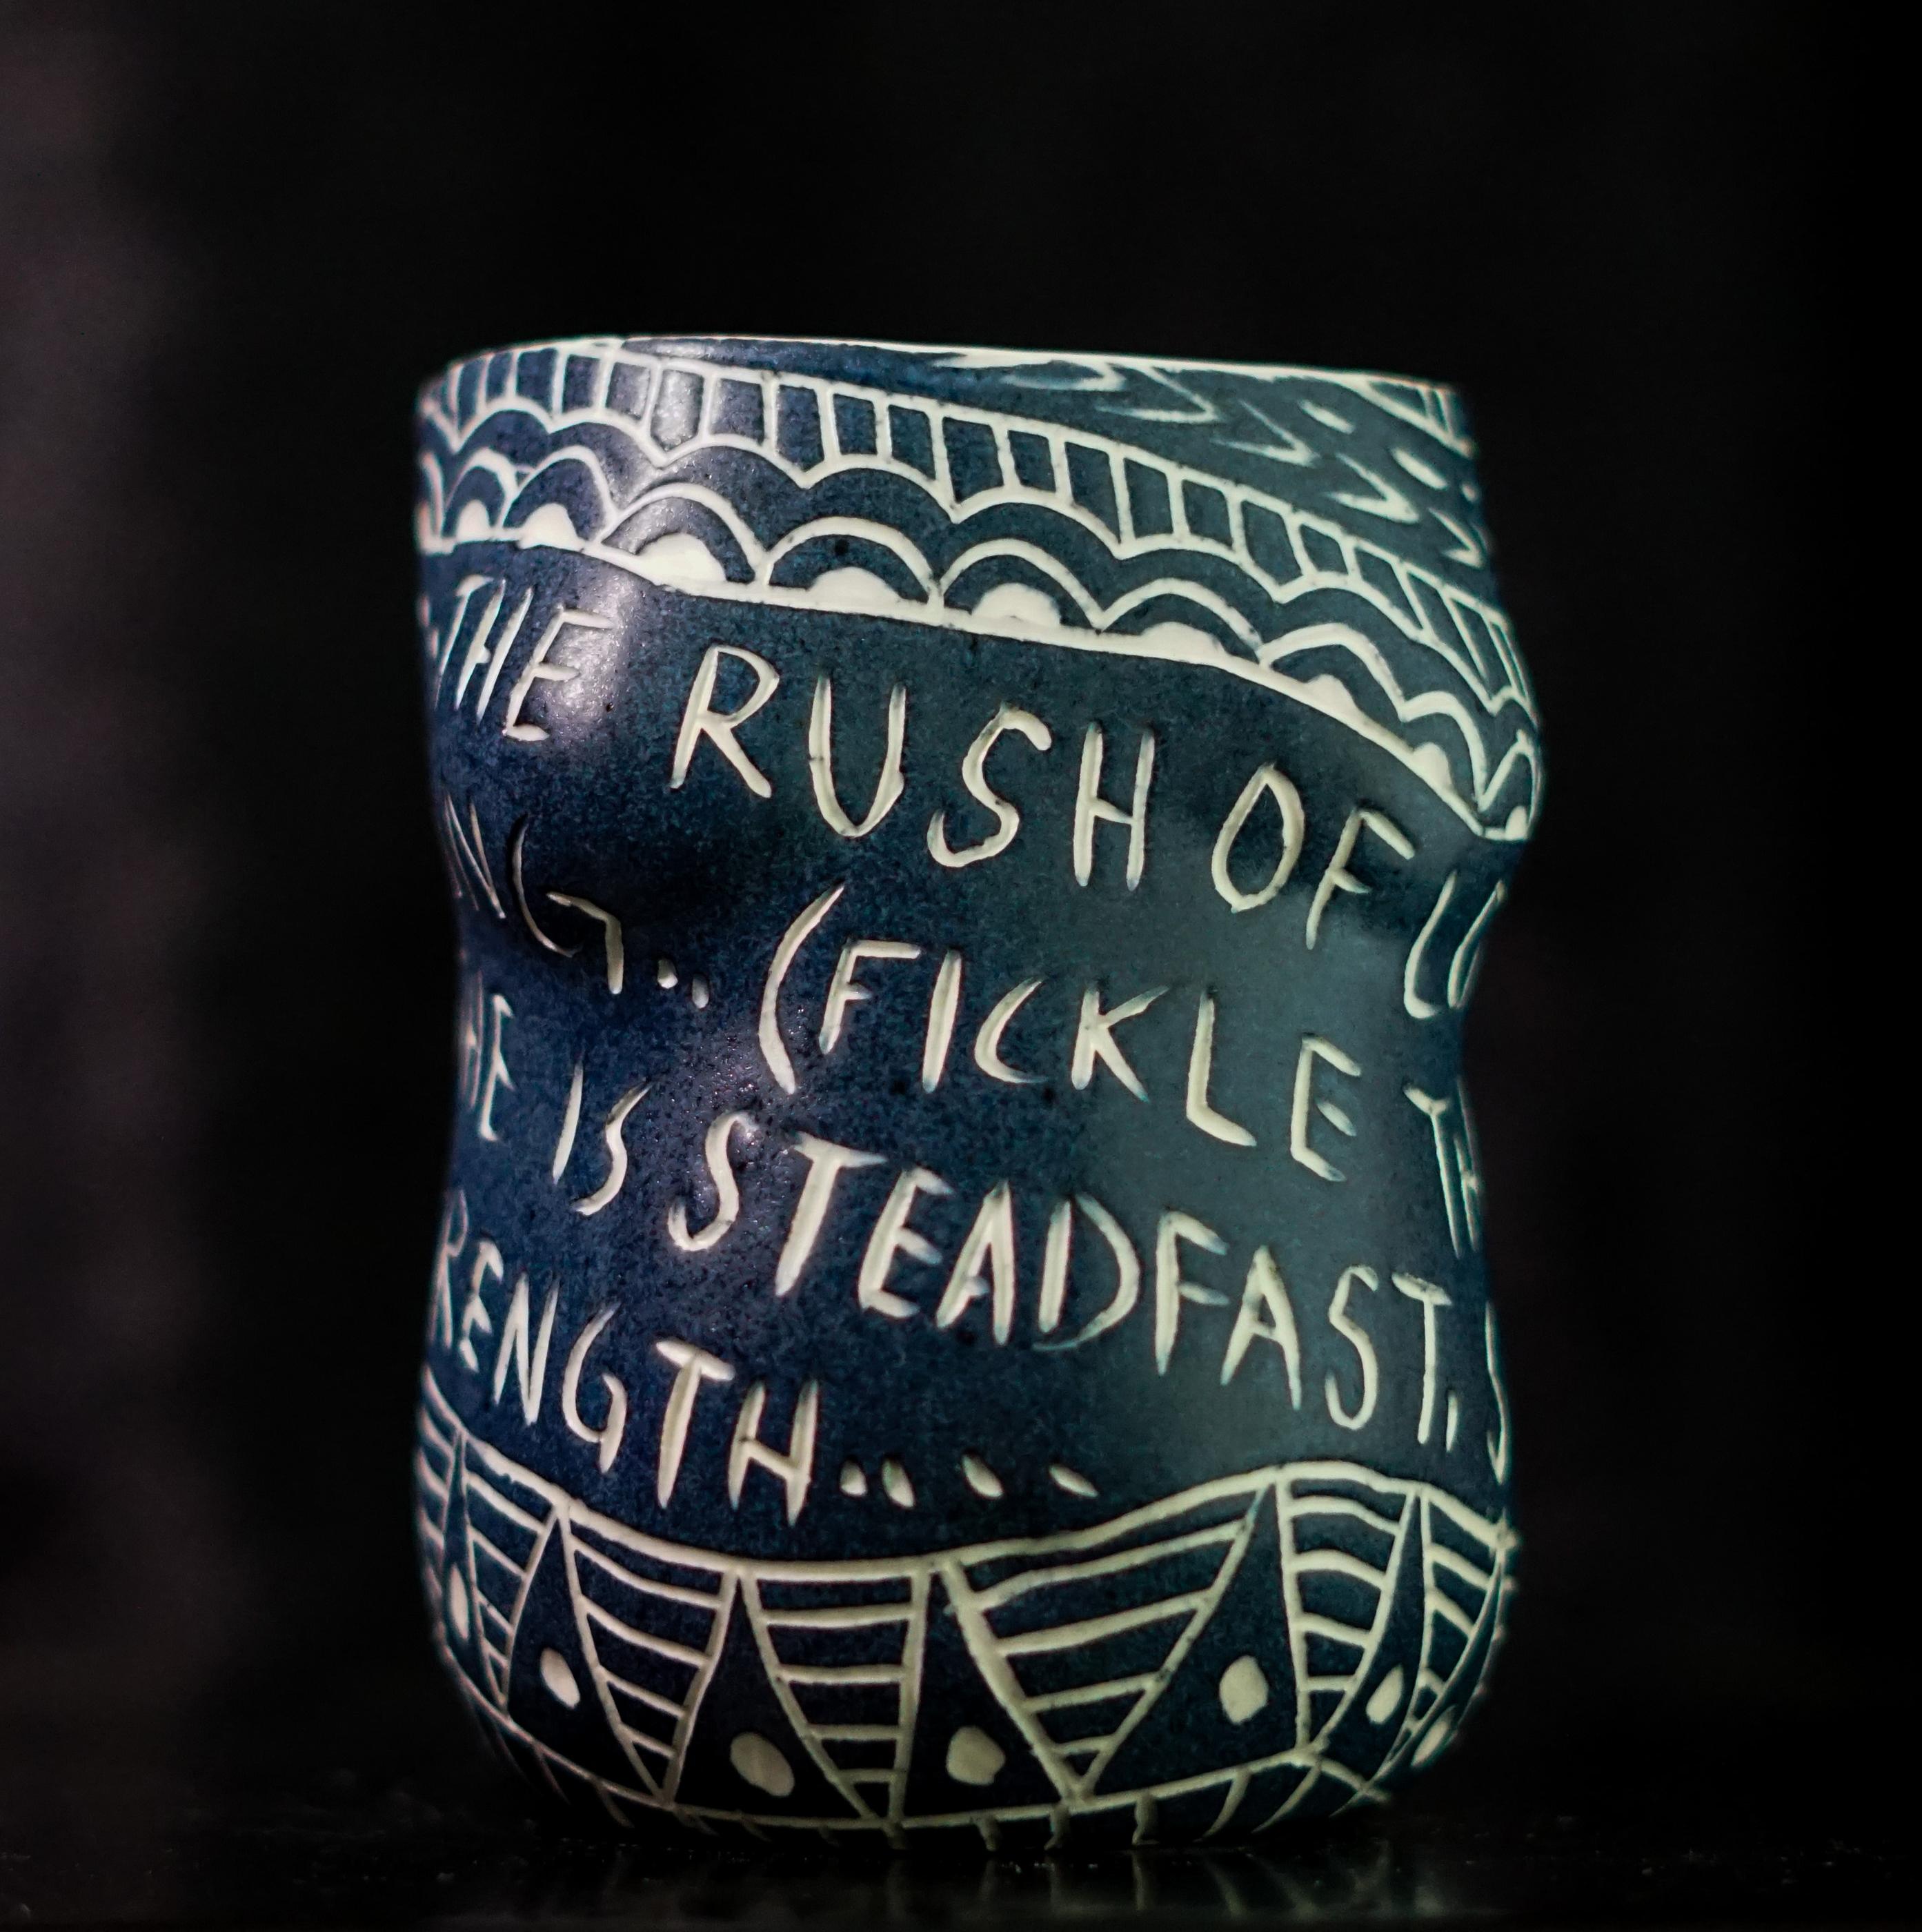 “The Rush of Love..” Porcelain cup with sgraffito detailing by the artist - Sculpture by Alex Hodge